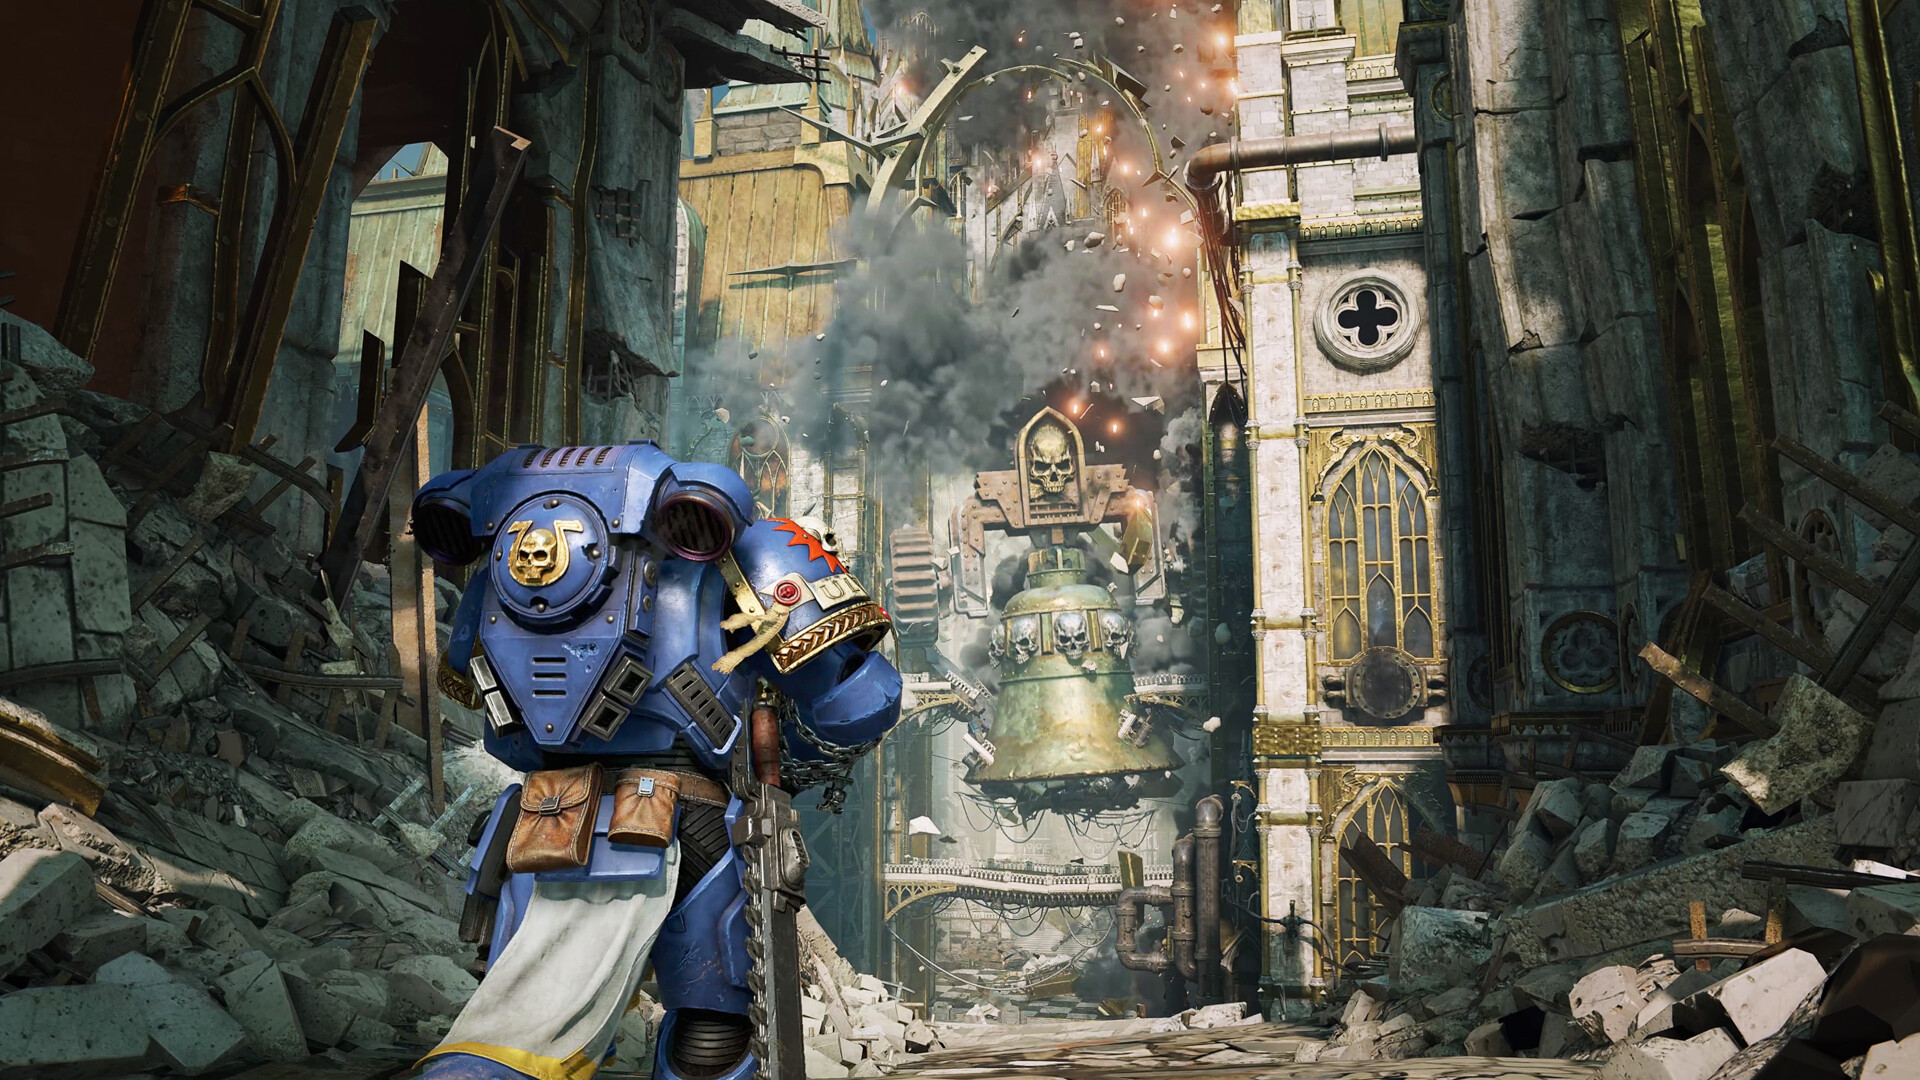 Warhammer 40,000: Space Marine 2 Will Feature PvP, as Per Official Art Book